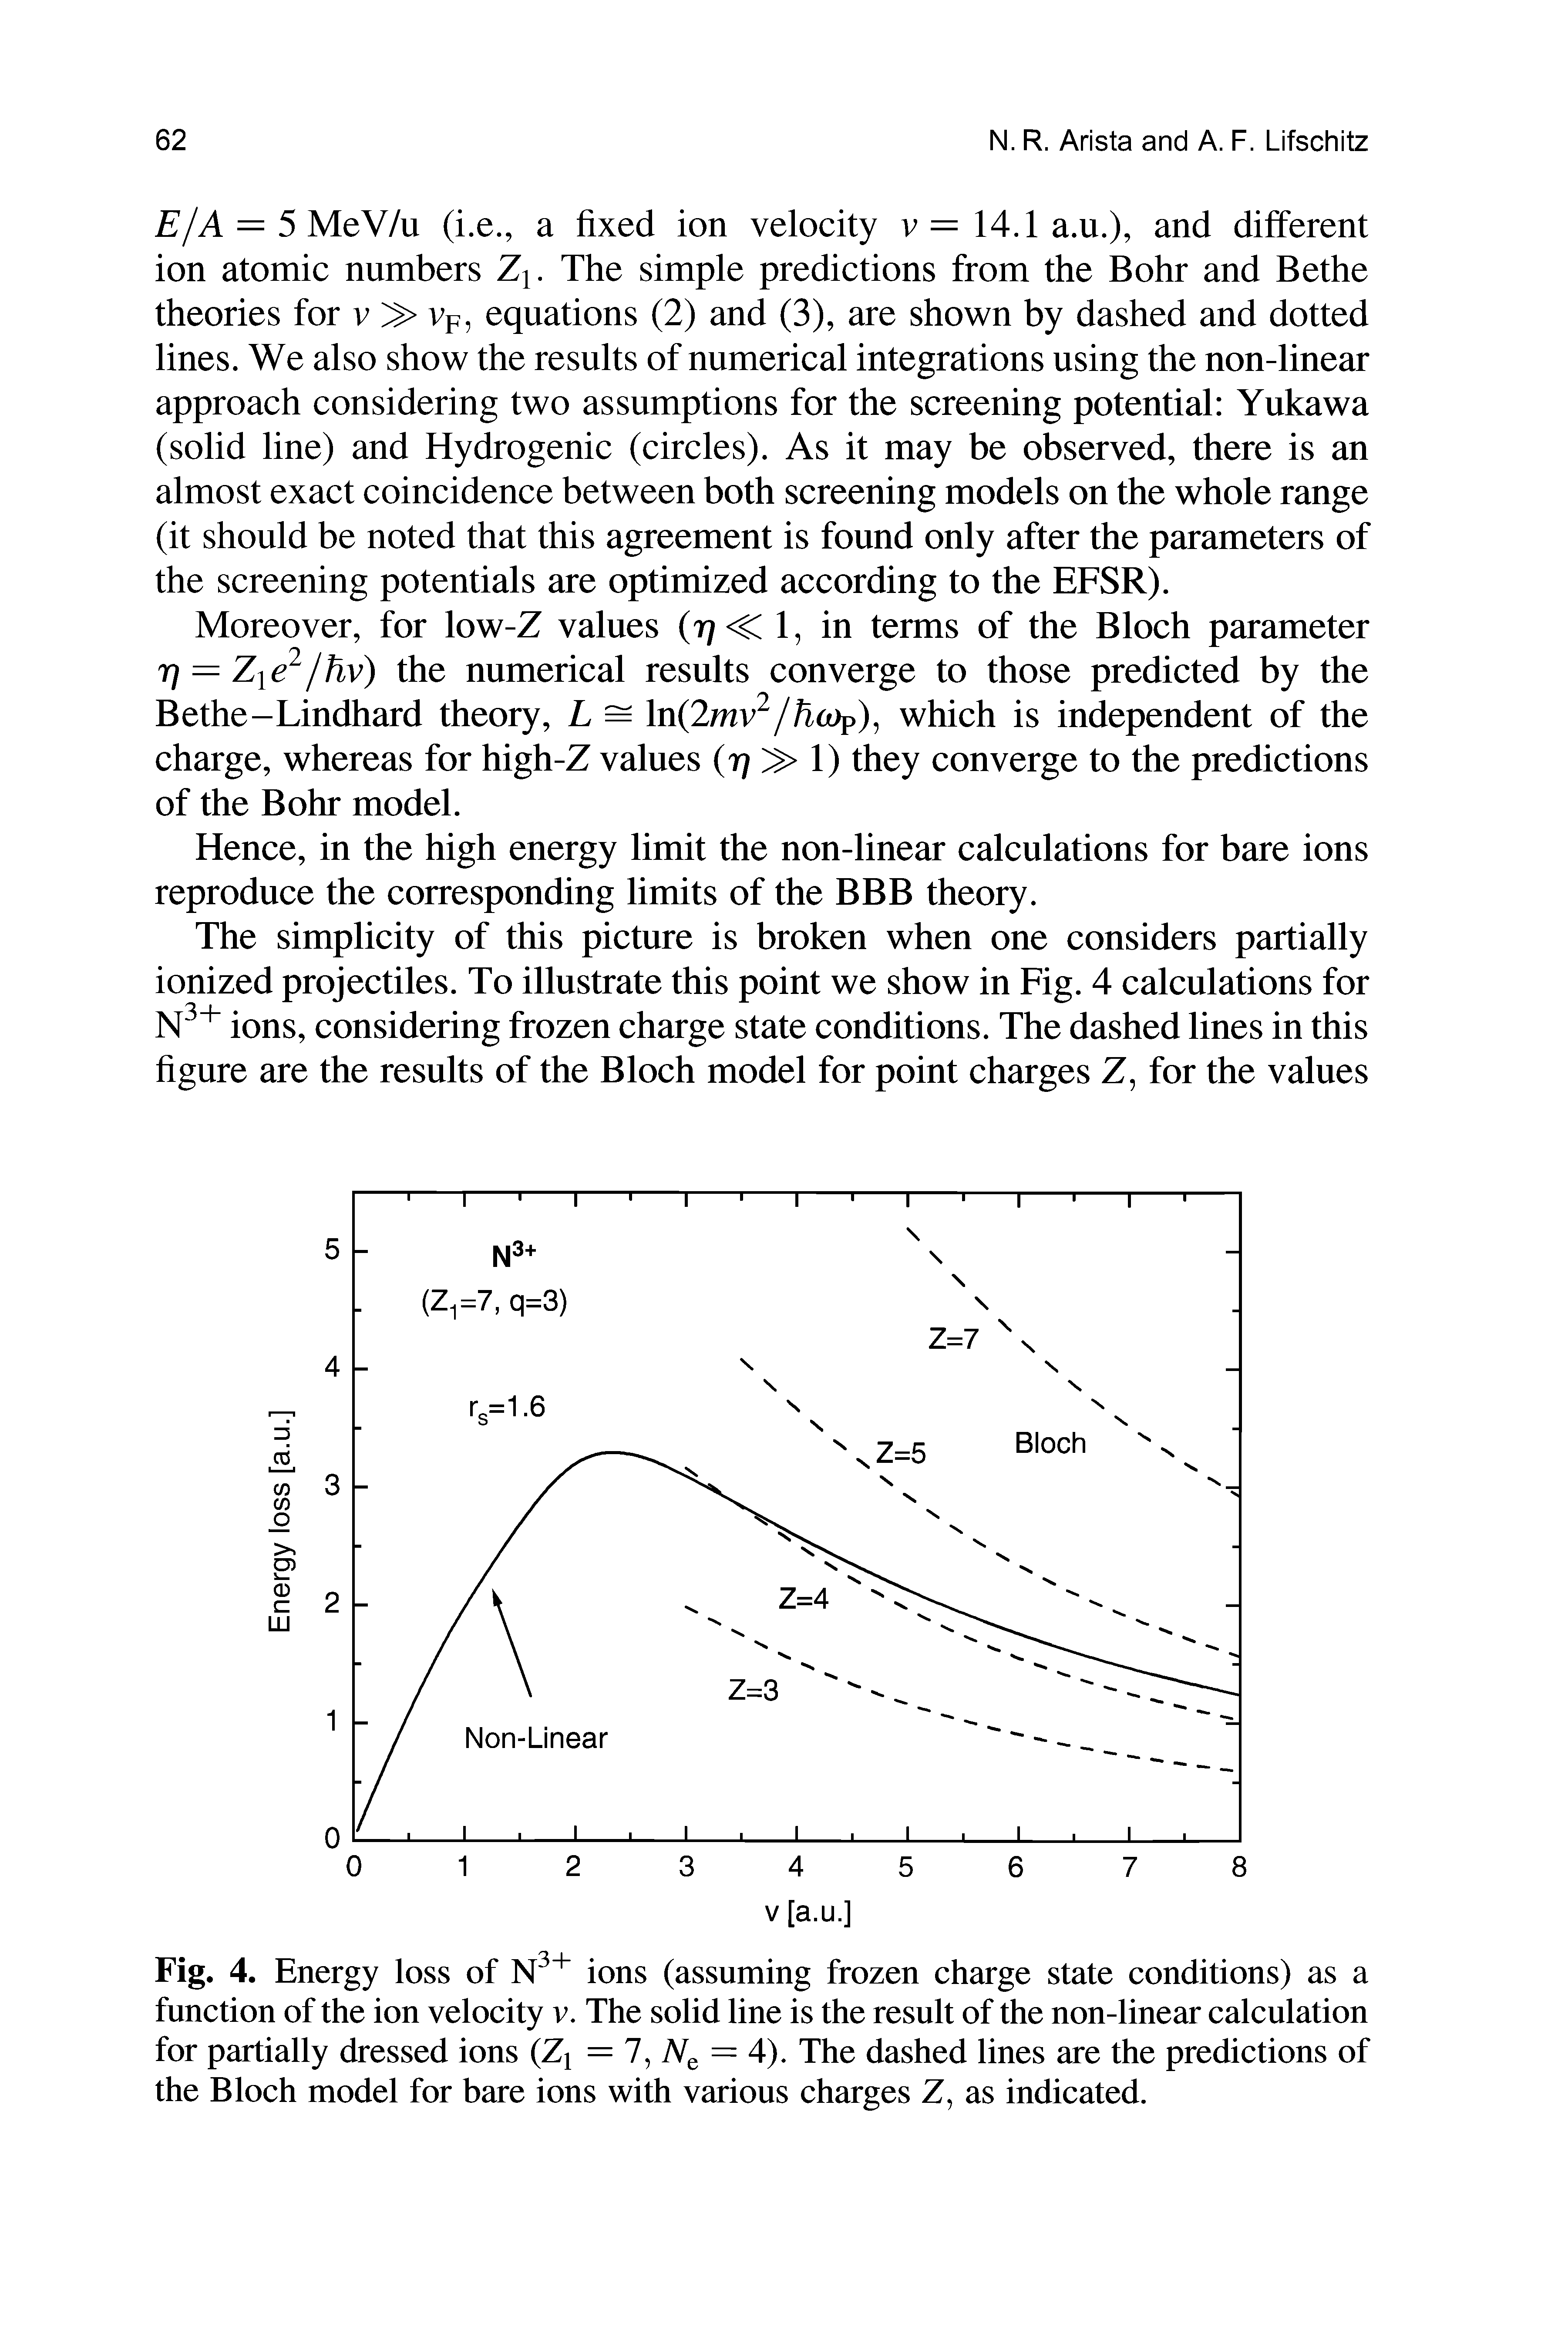 Fig. 4. Energy loss of ions (assuming frozen charge state conditions) as a function of the ion velocity r. The solid line is the result of the non-linear calculation for partially dressed ions (Z = 7, = 4). The dashed lines are the predictions of...